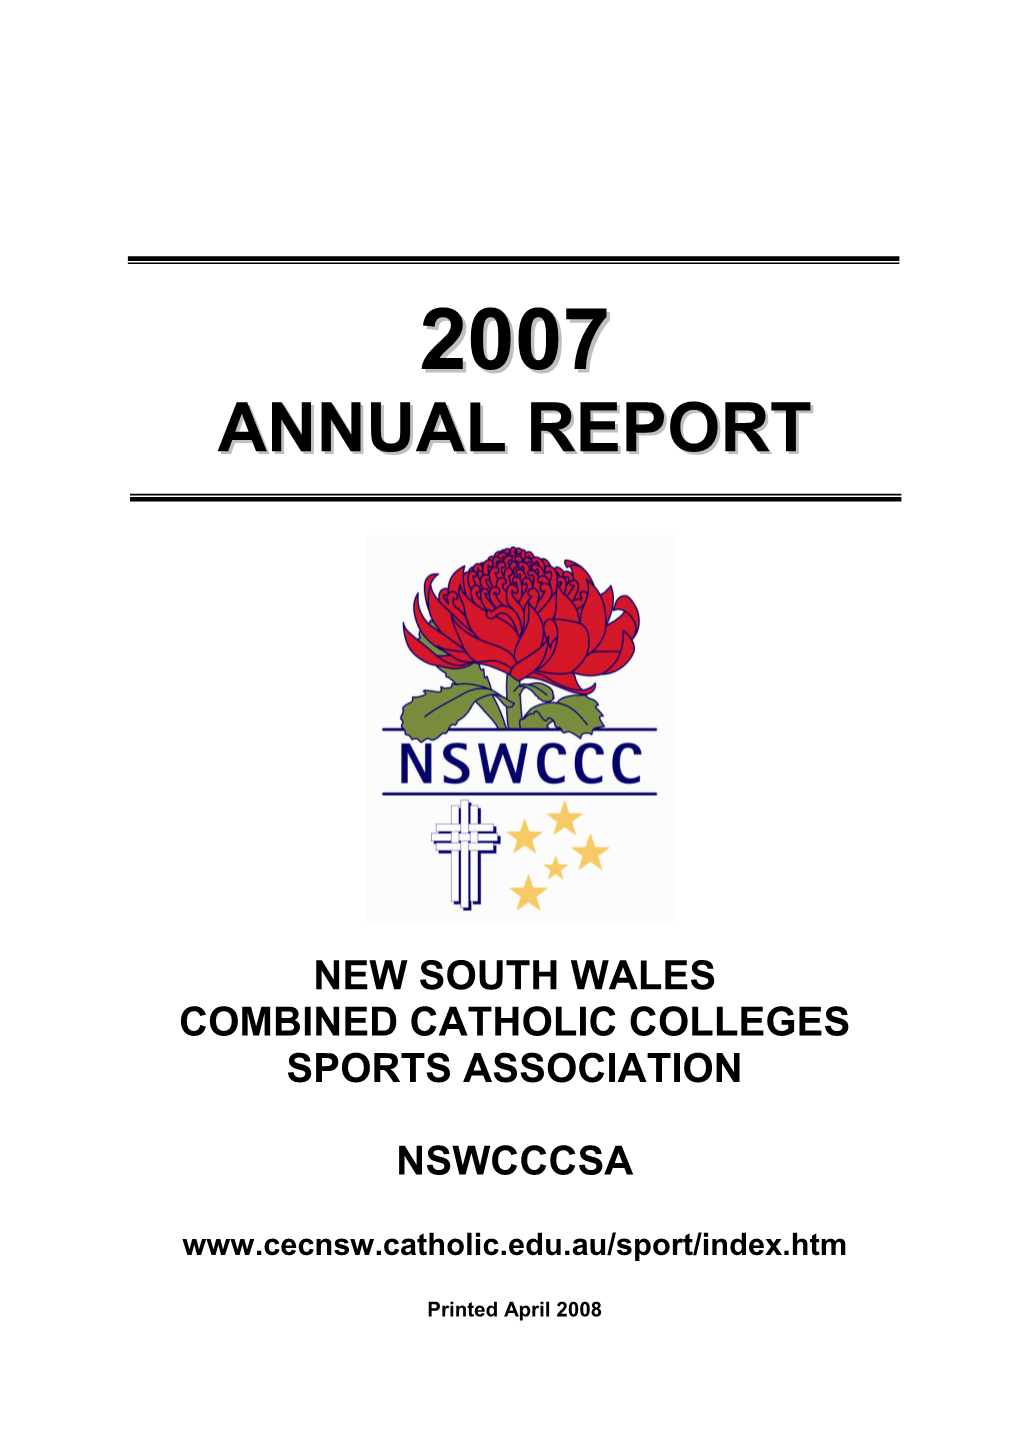 Annual Report 2007 Contents